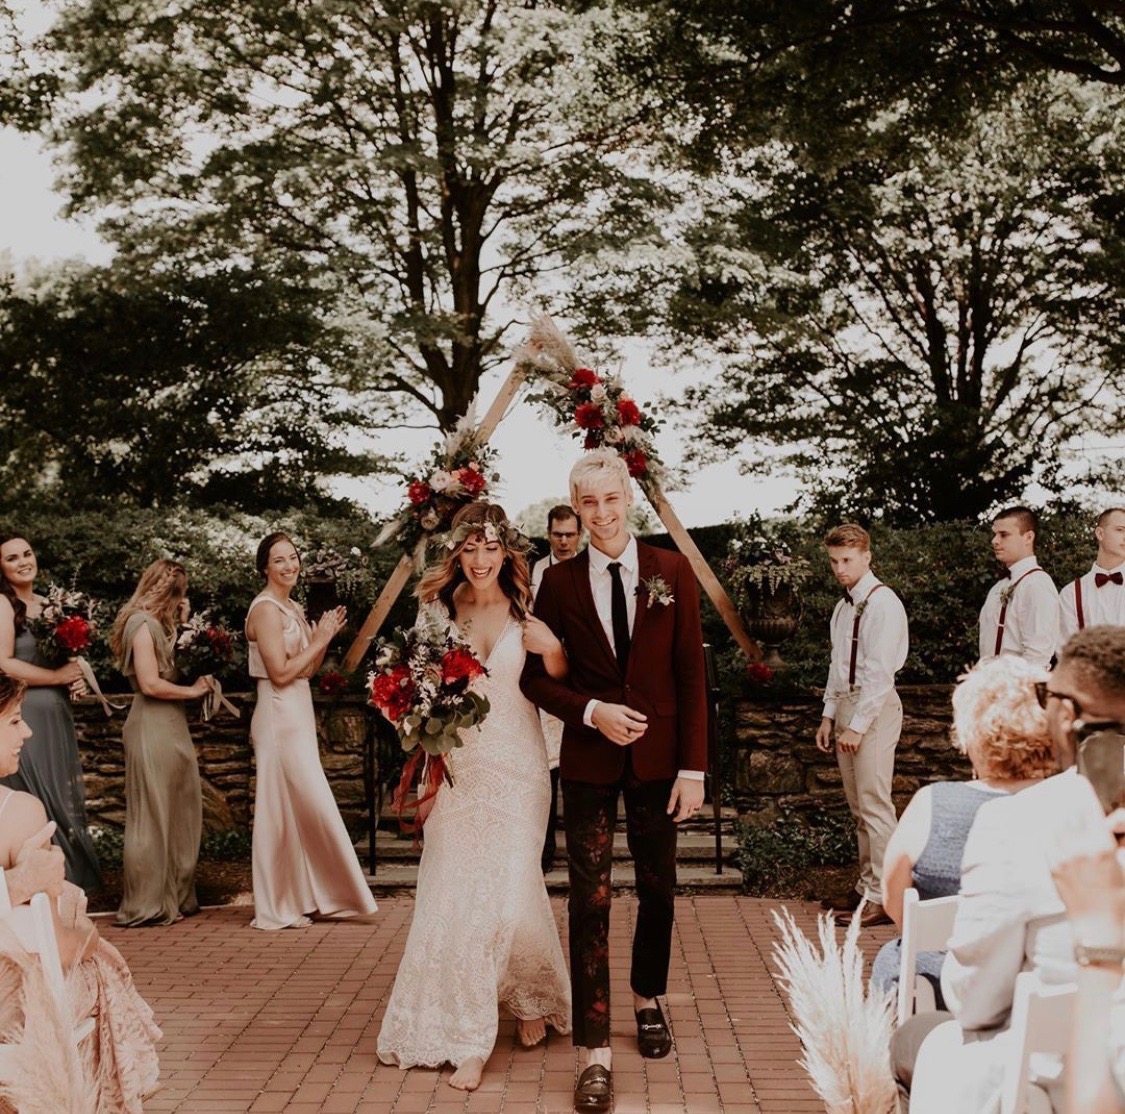 Mr. and Mrs, walking down the isle after wedding